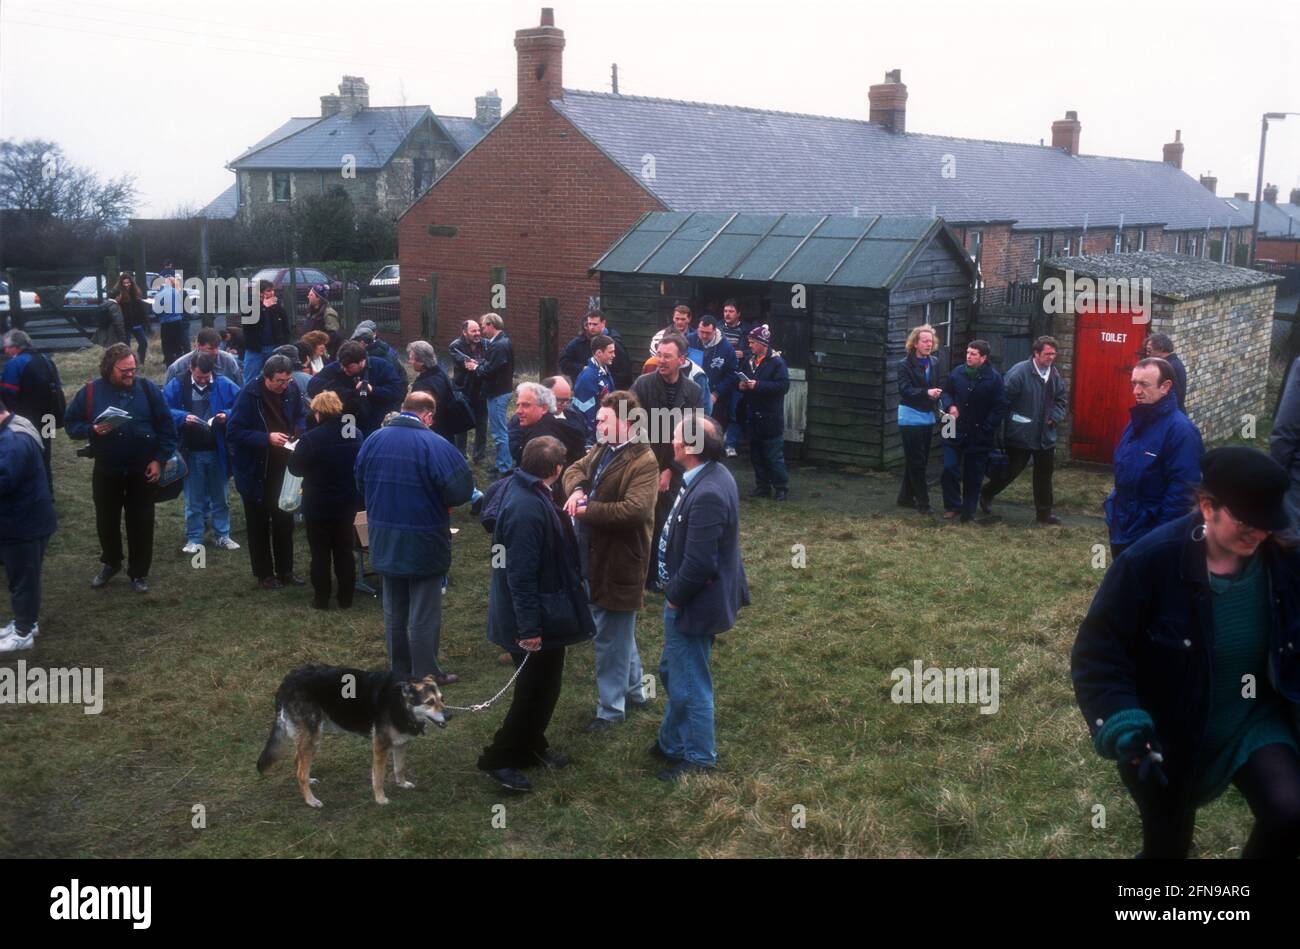 A crowd of non-league football supporters reading match program and waiting to enter football ground before a game Stock Photo